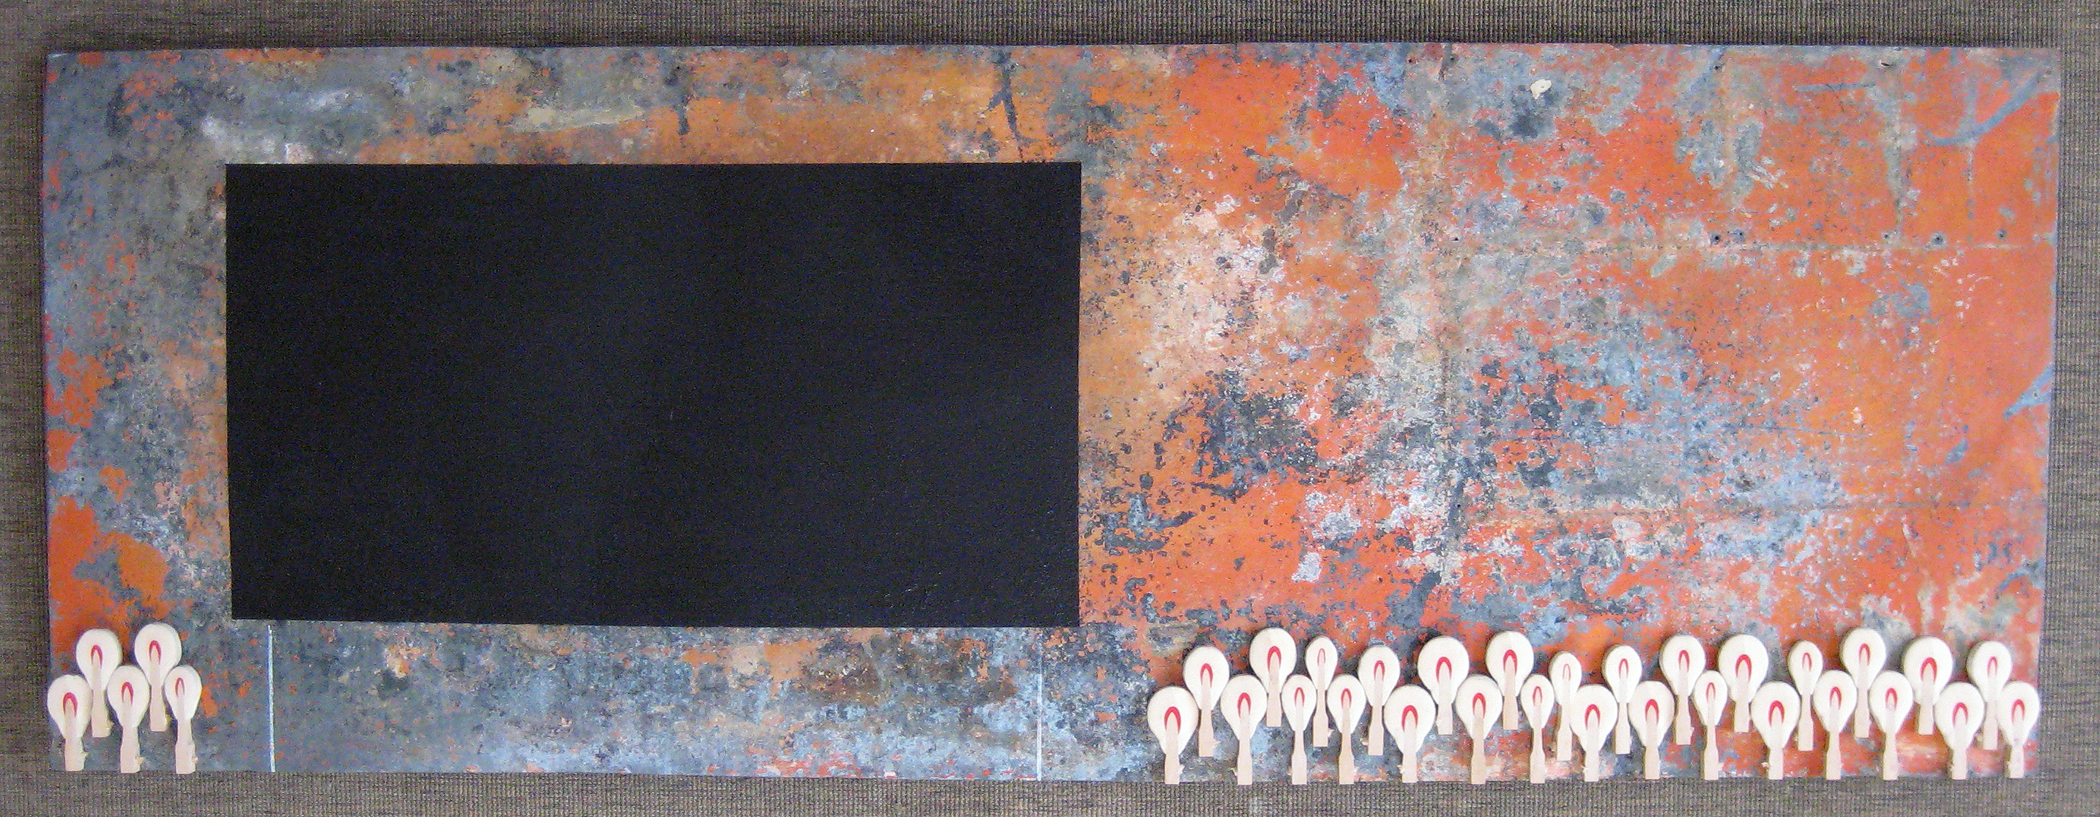    Untitled (black billboard)    19” x 53.25”  Acrylic, varnish, white charcoal, piano keys, on found metal   Price upon request 